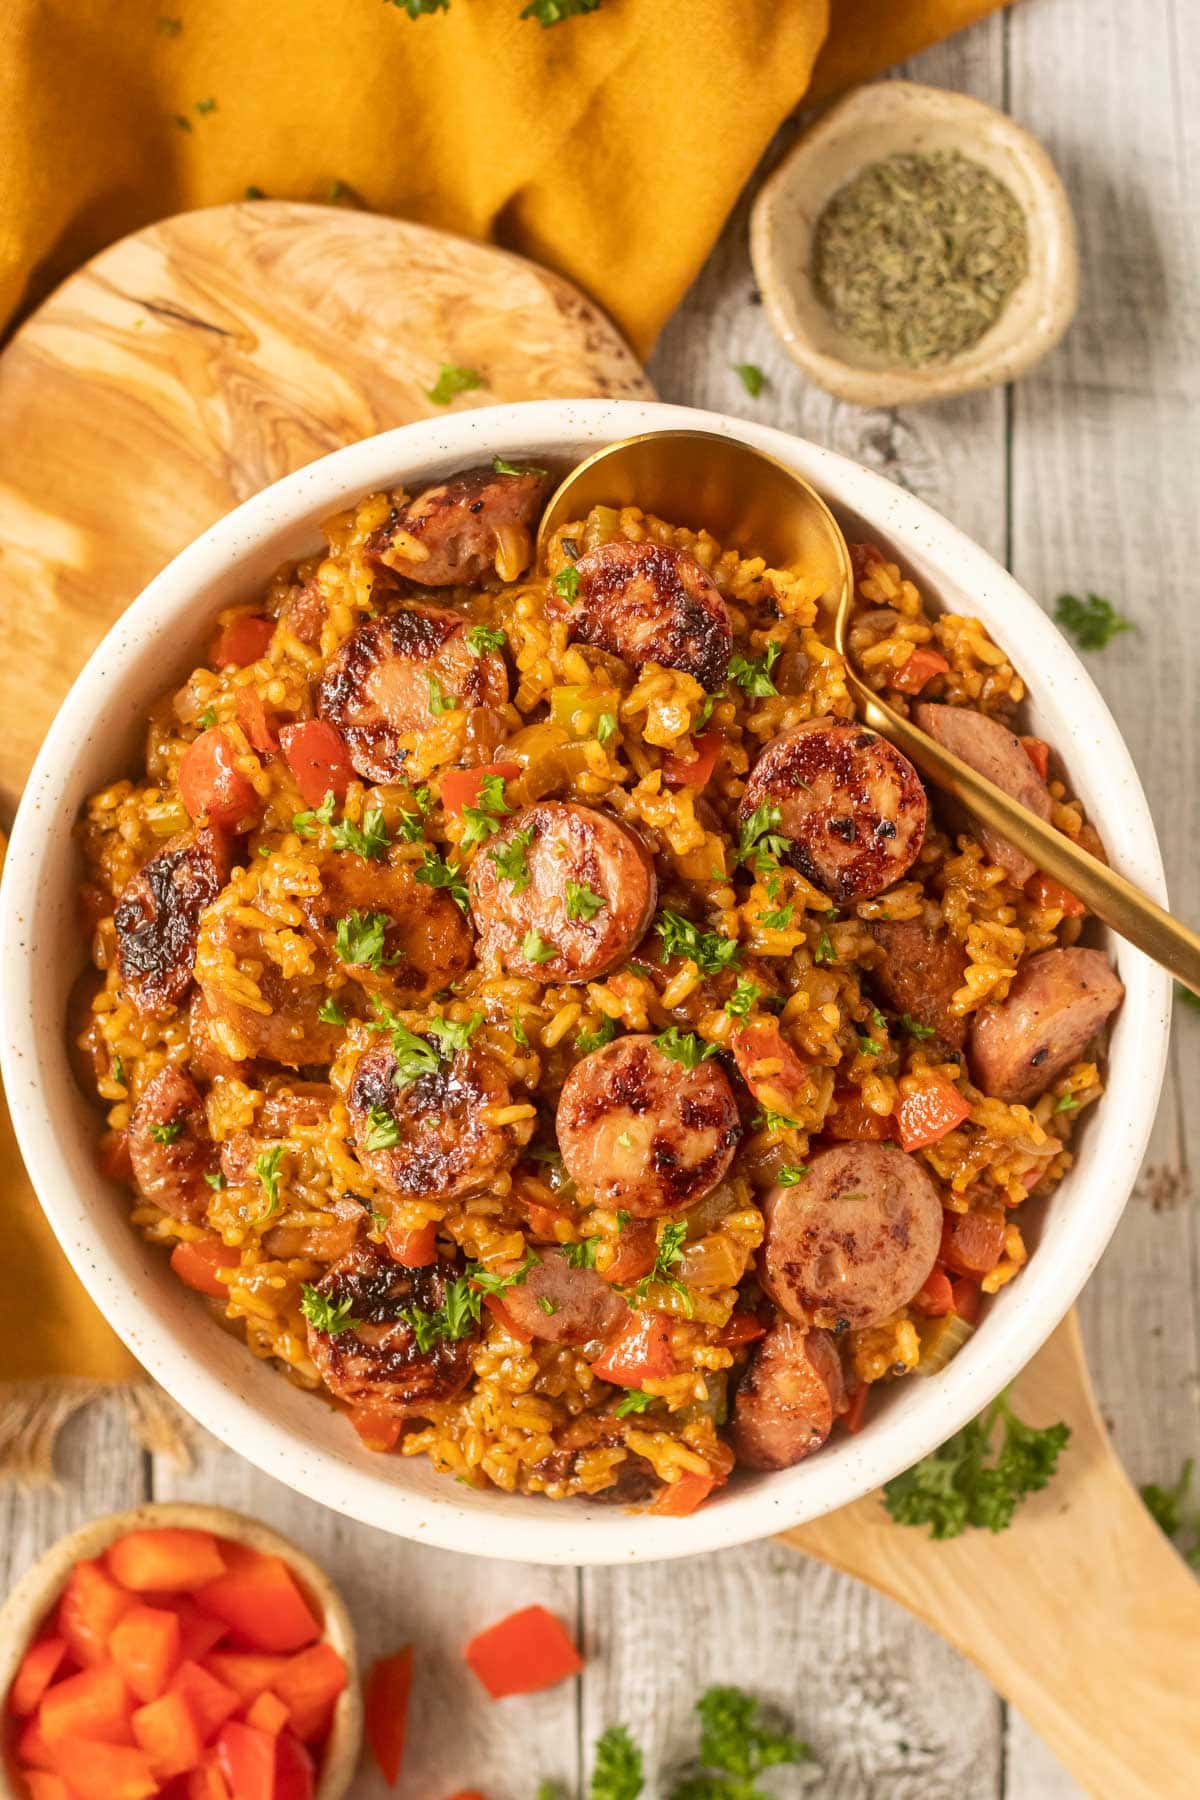 cajun dirty rice with smoked sausage in a white bowl on a wooden cutting board.